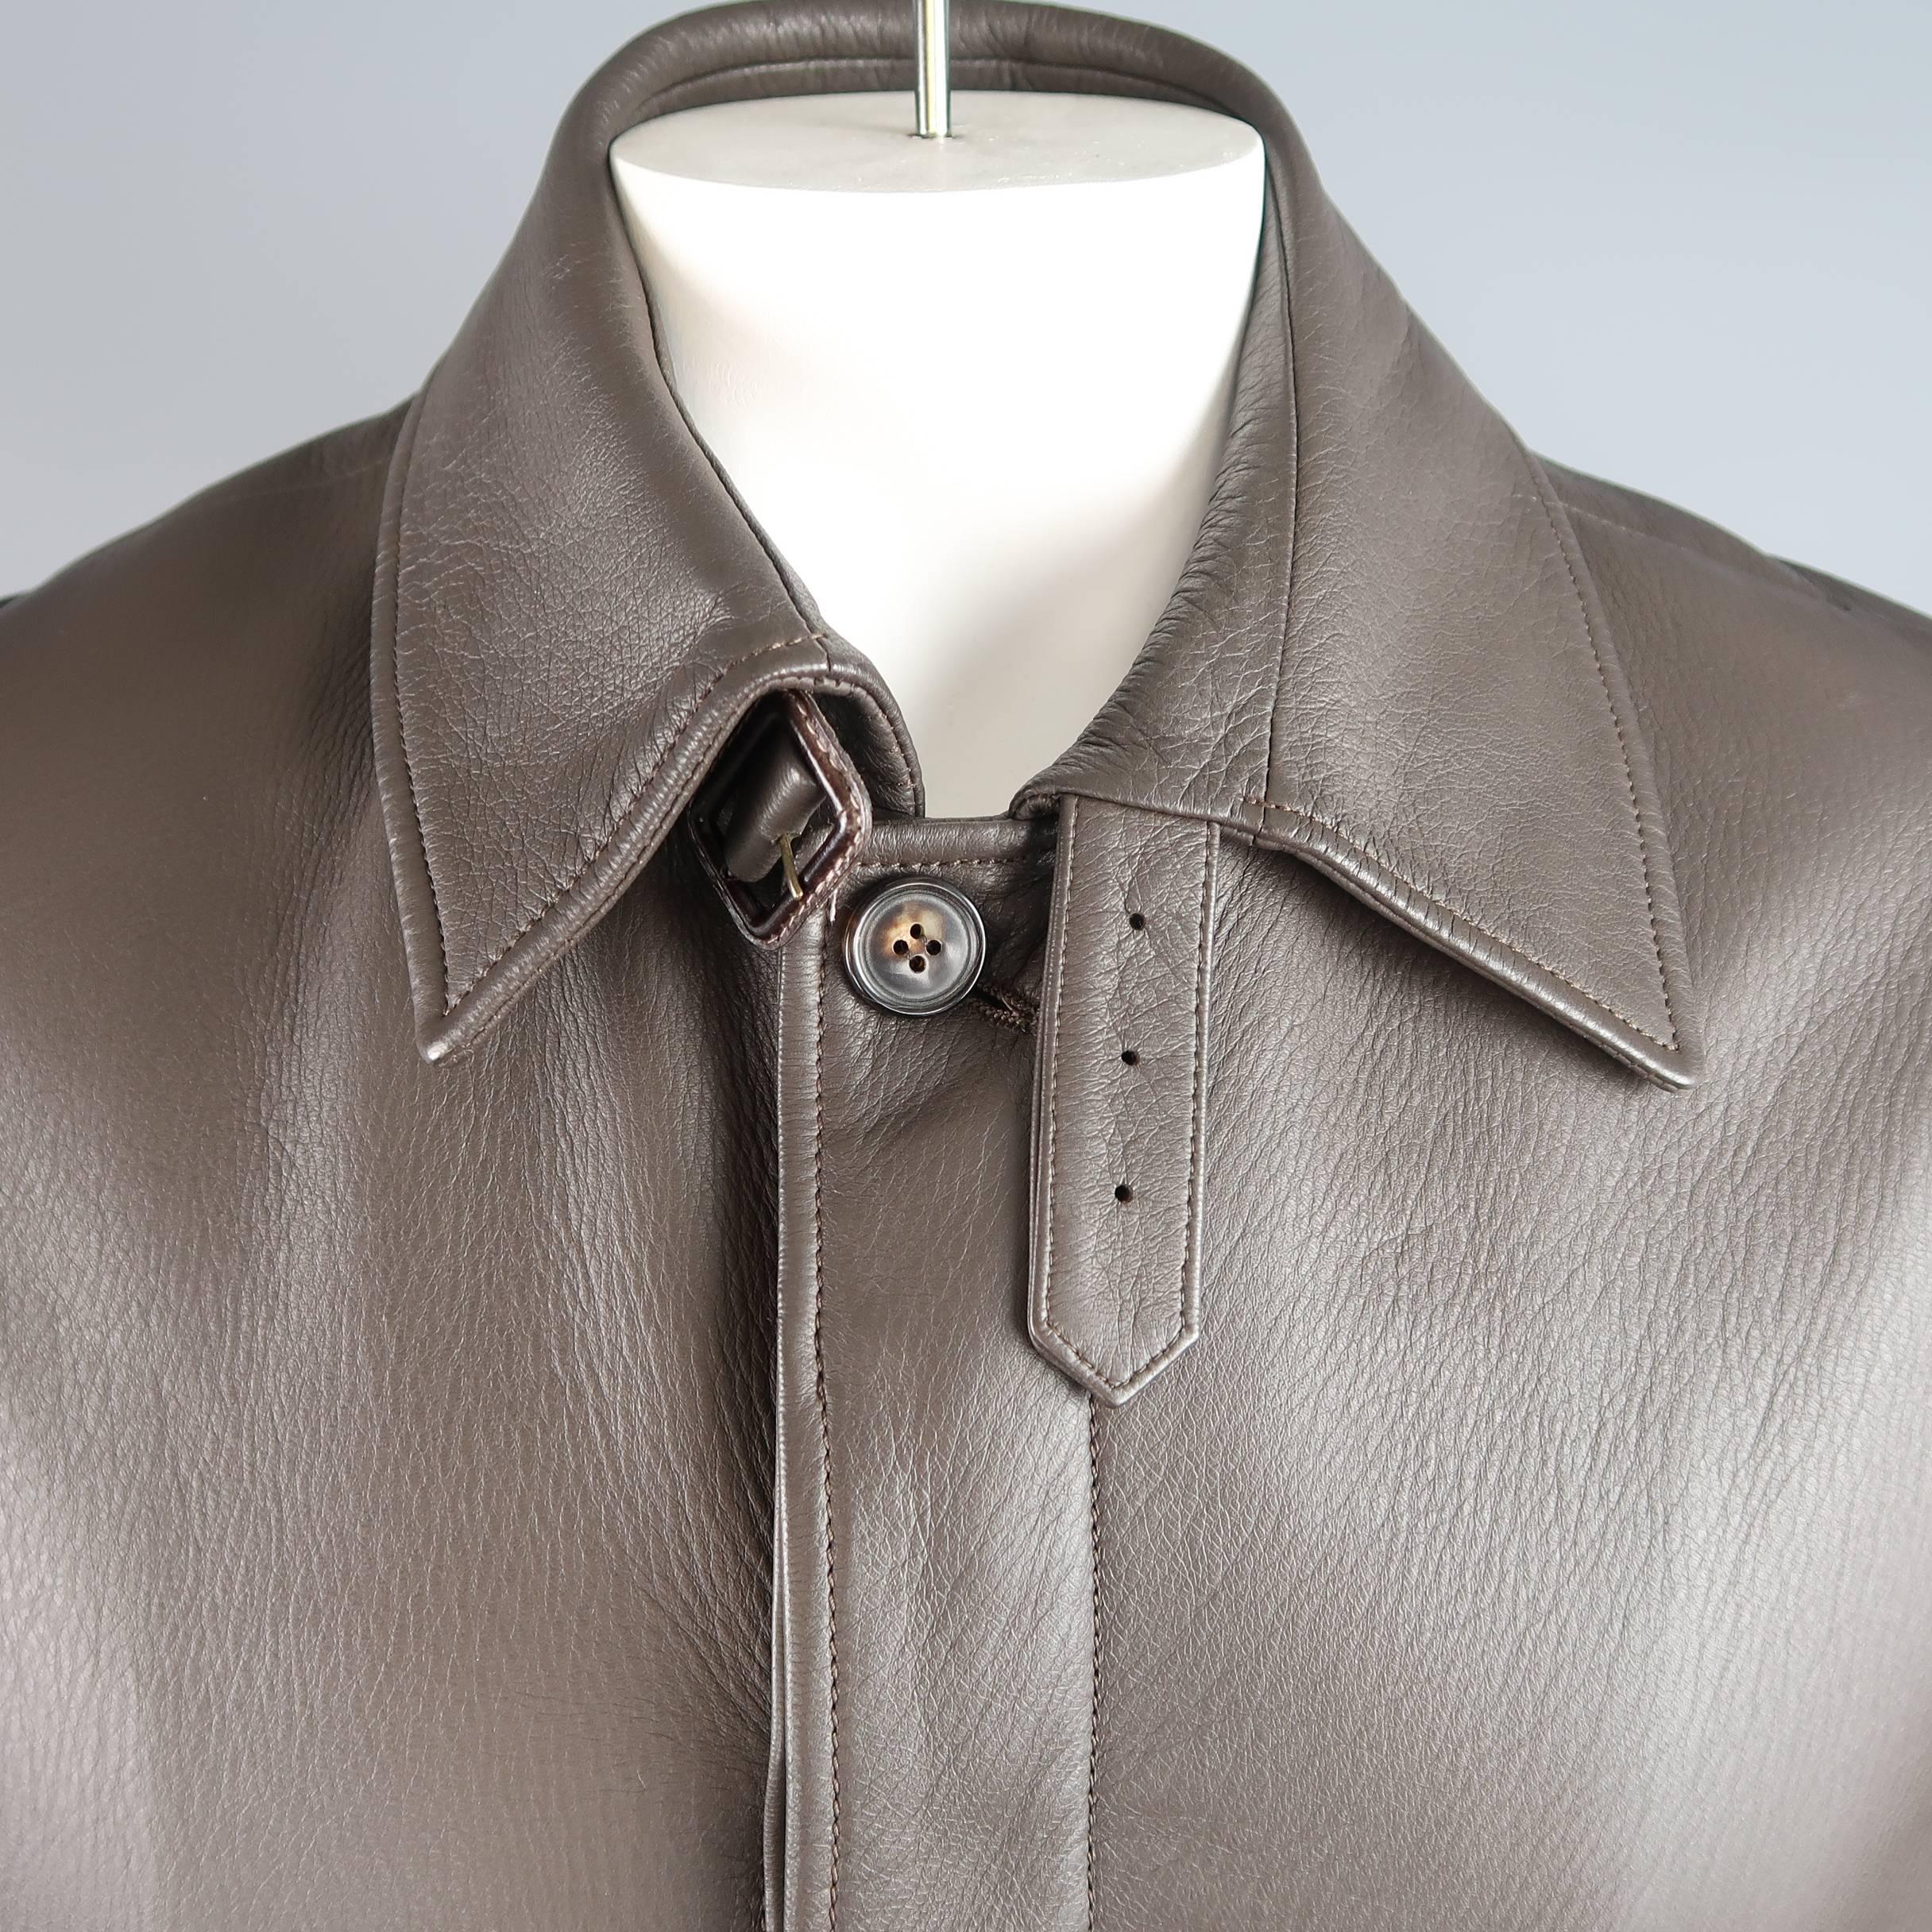 PAUL STUART car coat comes in a supple dark taupe textured leather and features a classic pointed collar with buckle tab, hidden placket button front, slanted pockets, belted cuffs, and silk satin liner. Made in France.
 
Excellent Pre-Owned